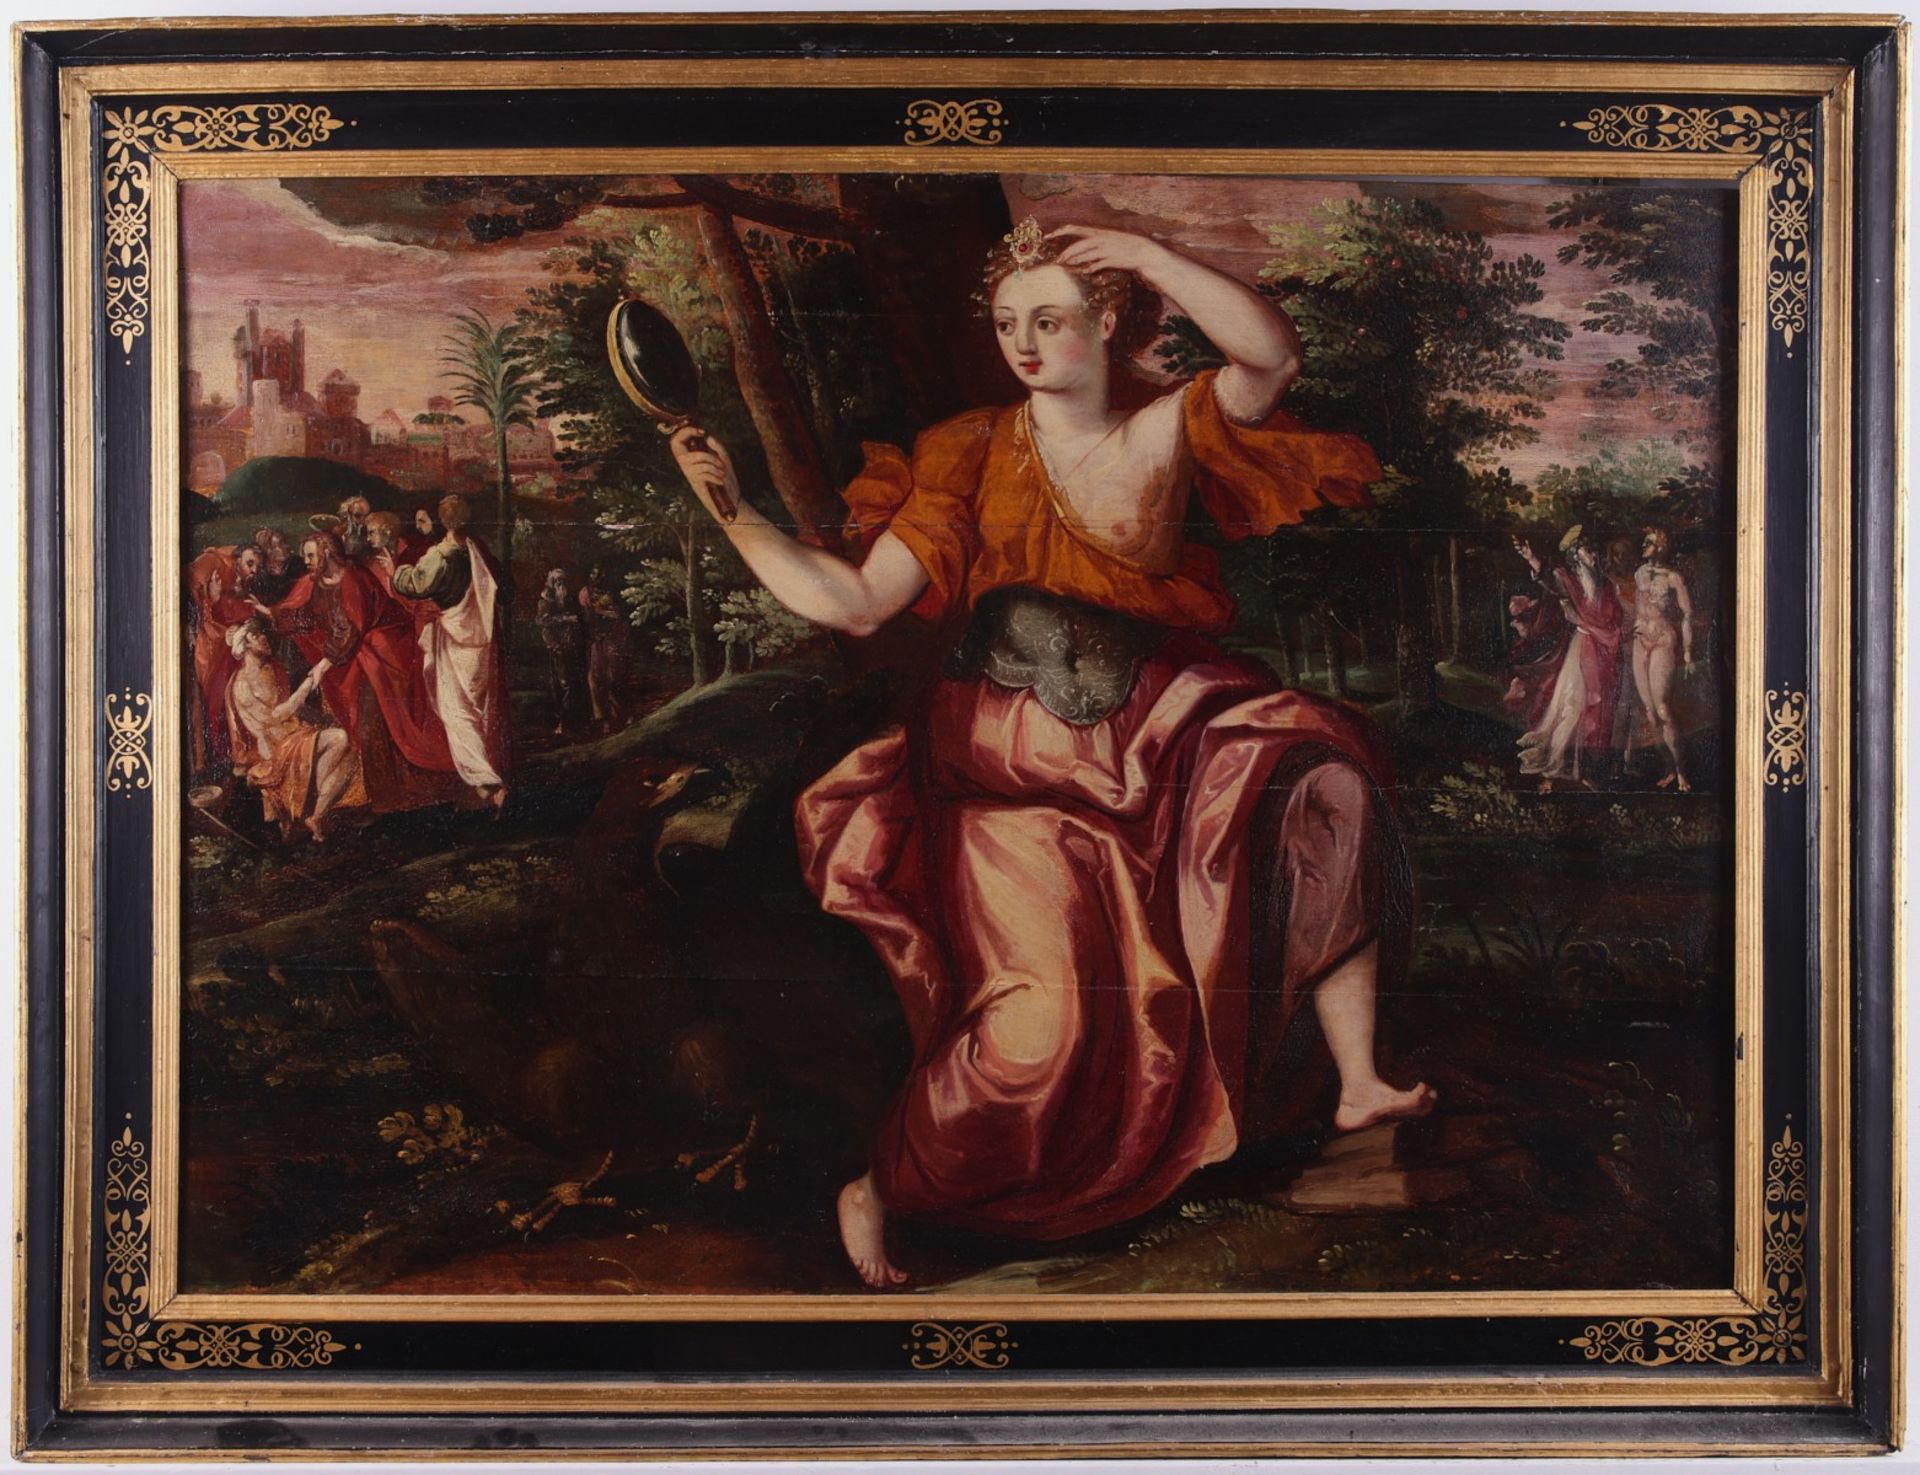 2 18th/19th c. Flemish School Old Master Paintings - Image 8 of 12